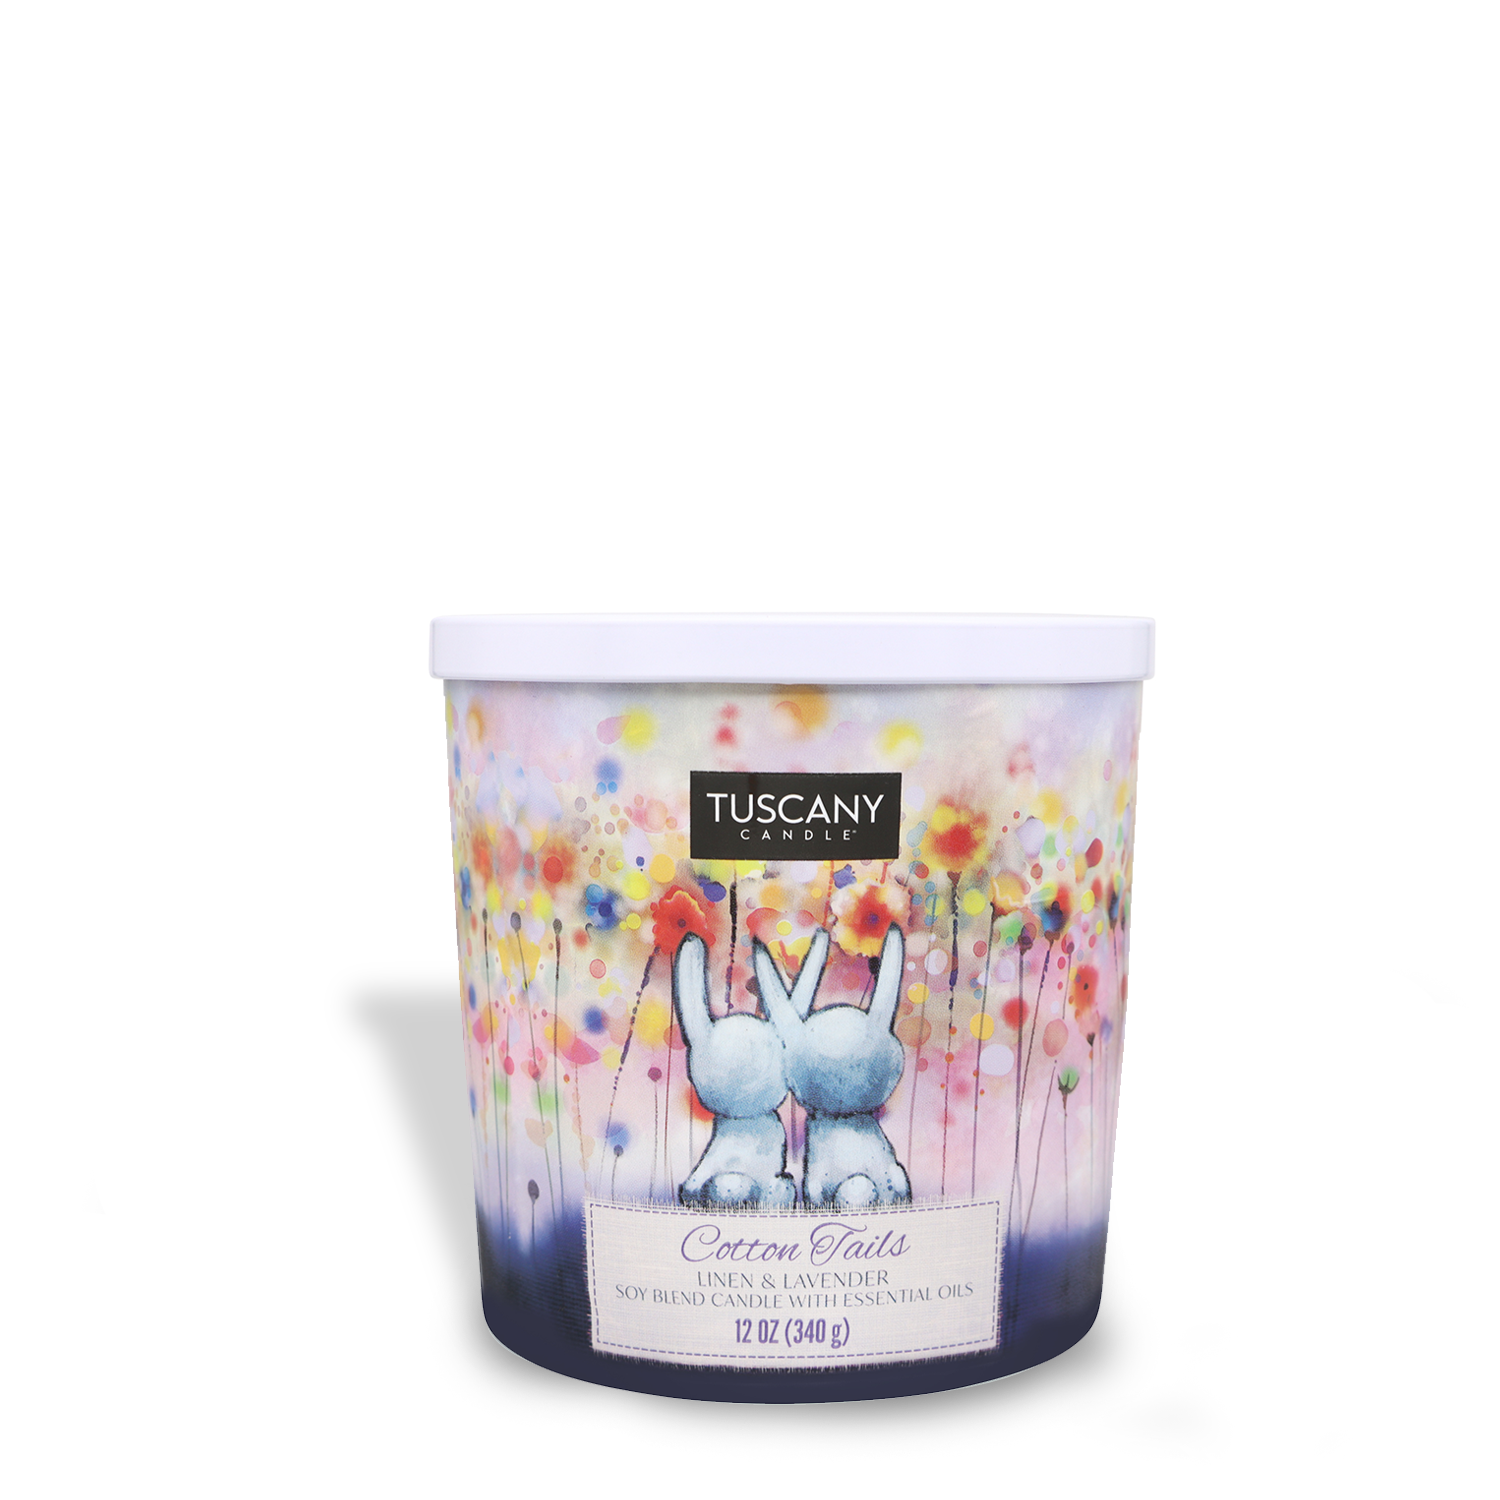 A calming Cotton Tails Long-Lasting Scented Jar Candle (12 oz) with an image of a bunny for Easter.